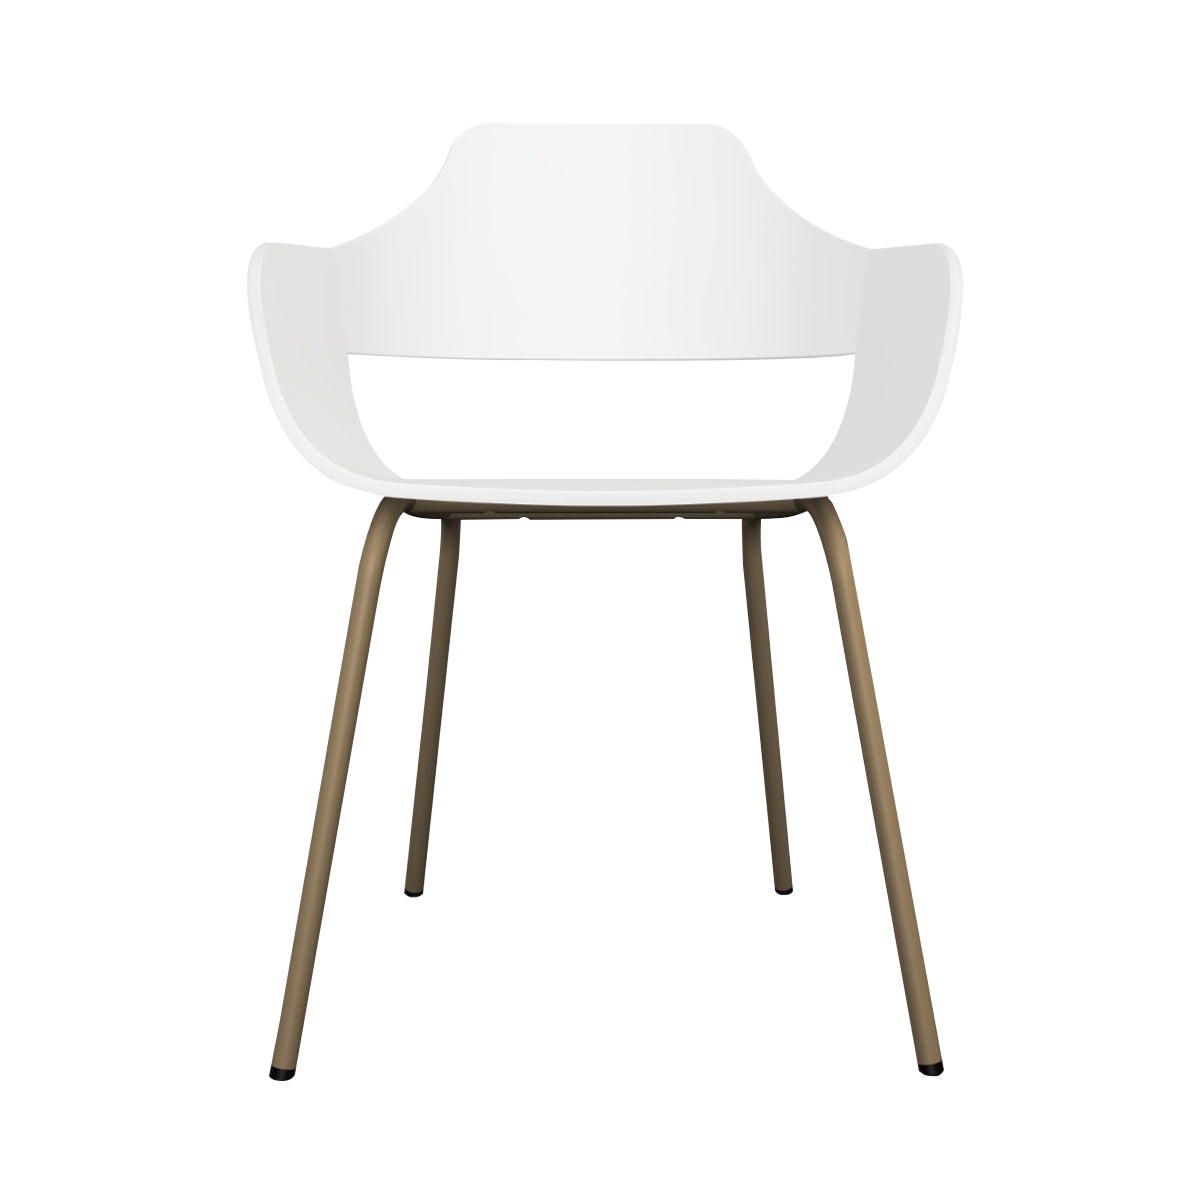 Showtime Chair with Metal Base: Lacquered White + Beige